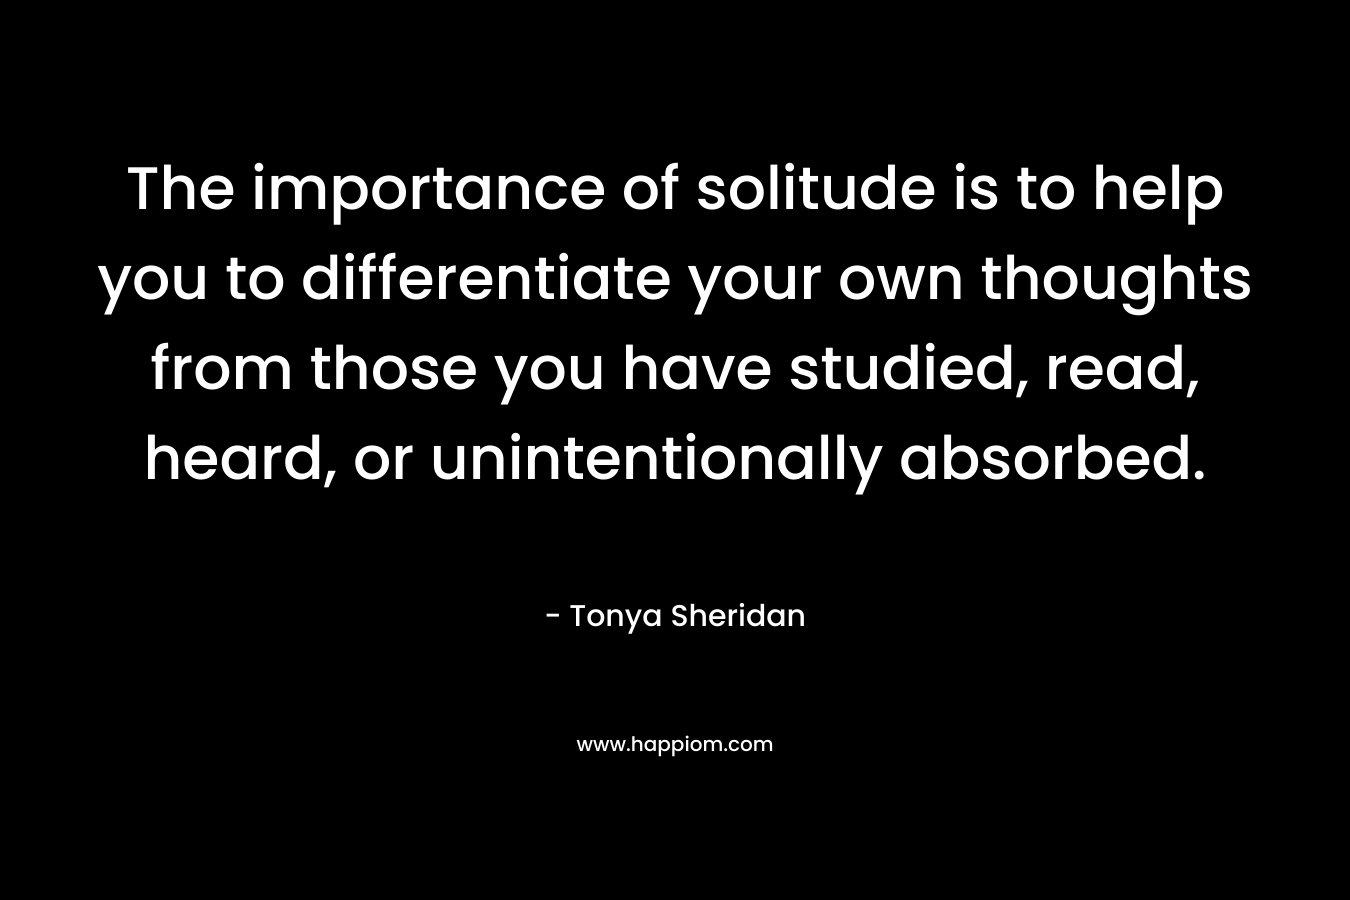 The importance of solitude is to help you to differentiate your own thoughts from those you have studied, read, heard, or unintentionally absorbed. – Tonya Sheridan